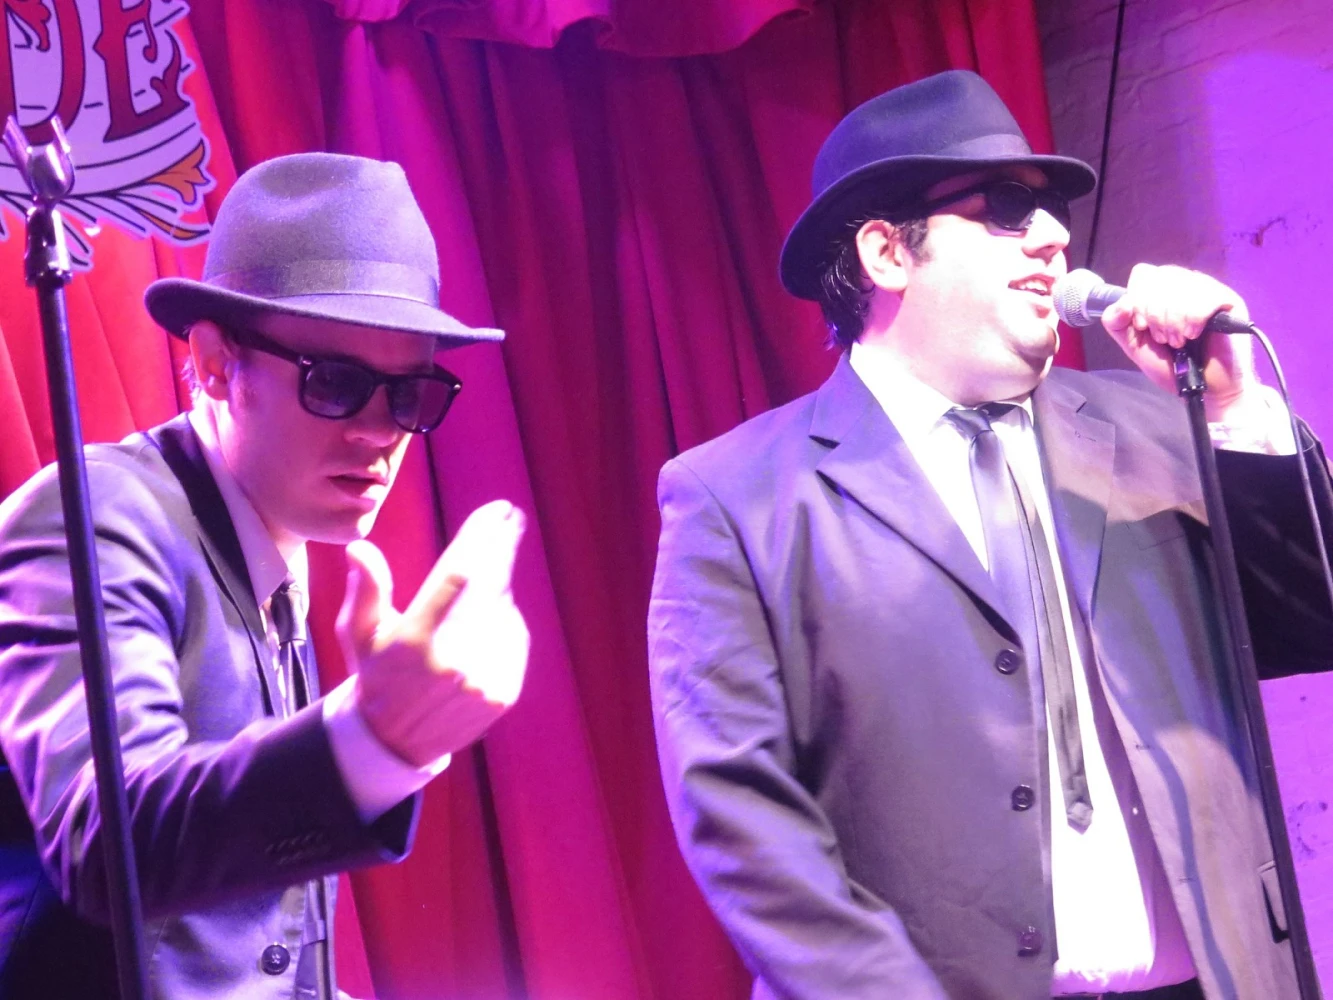 Atlantic City Blues Brothers: What to expect - 3